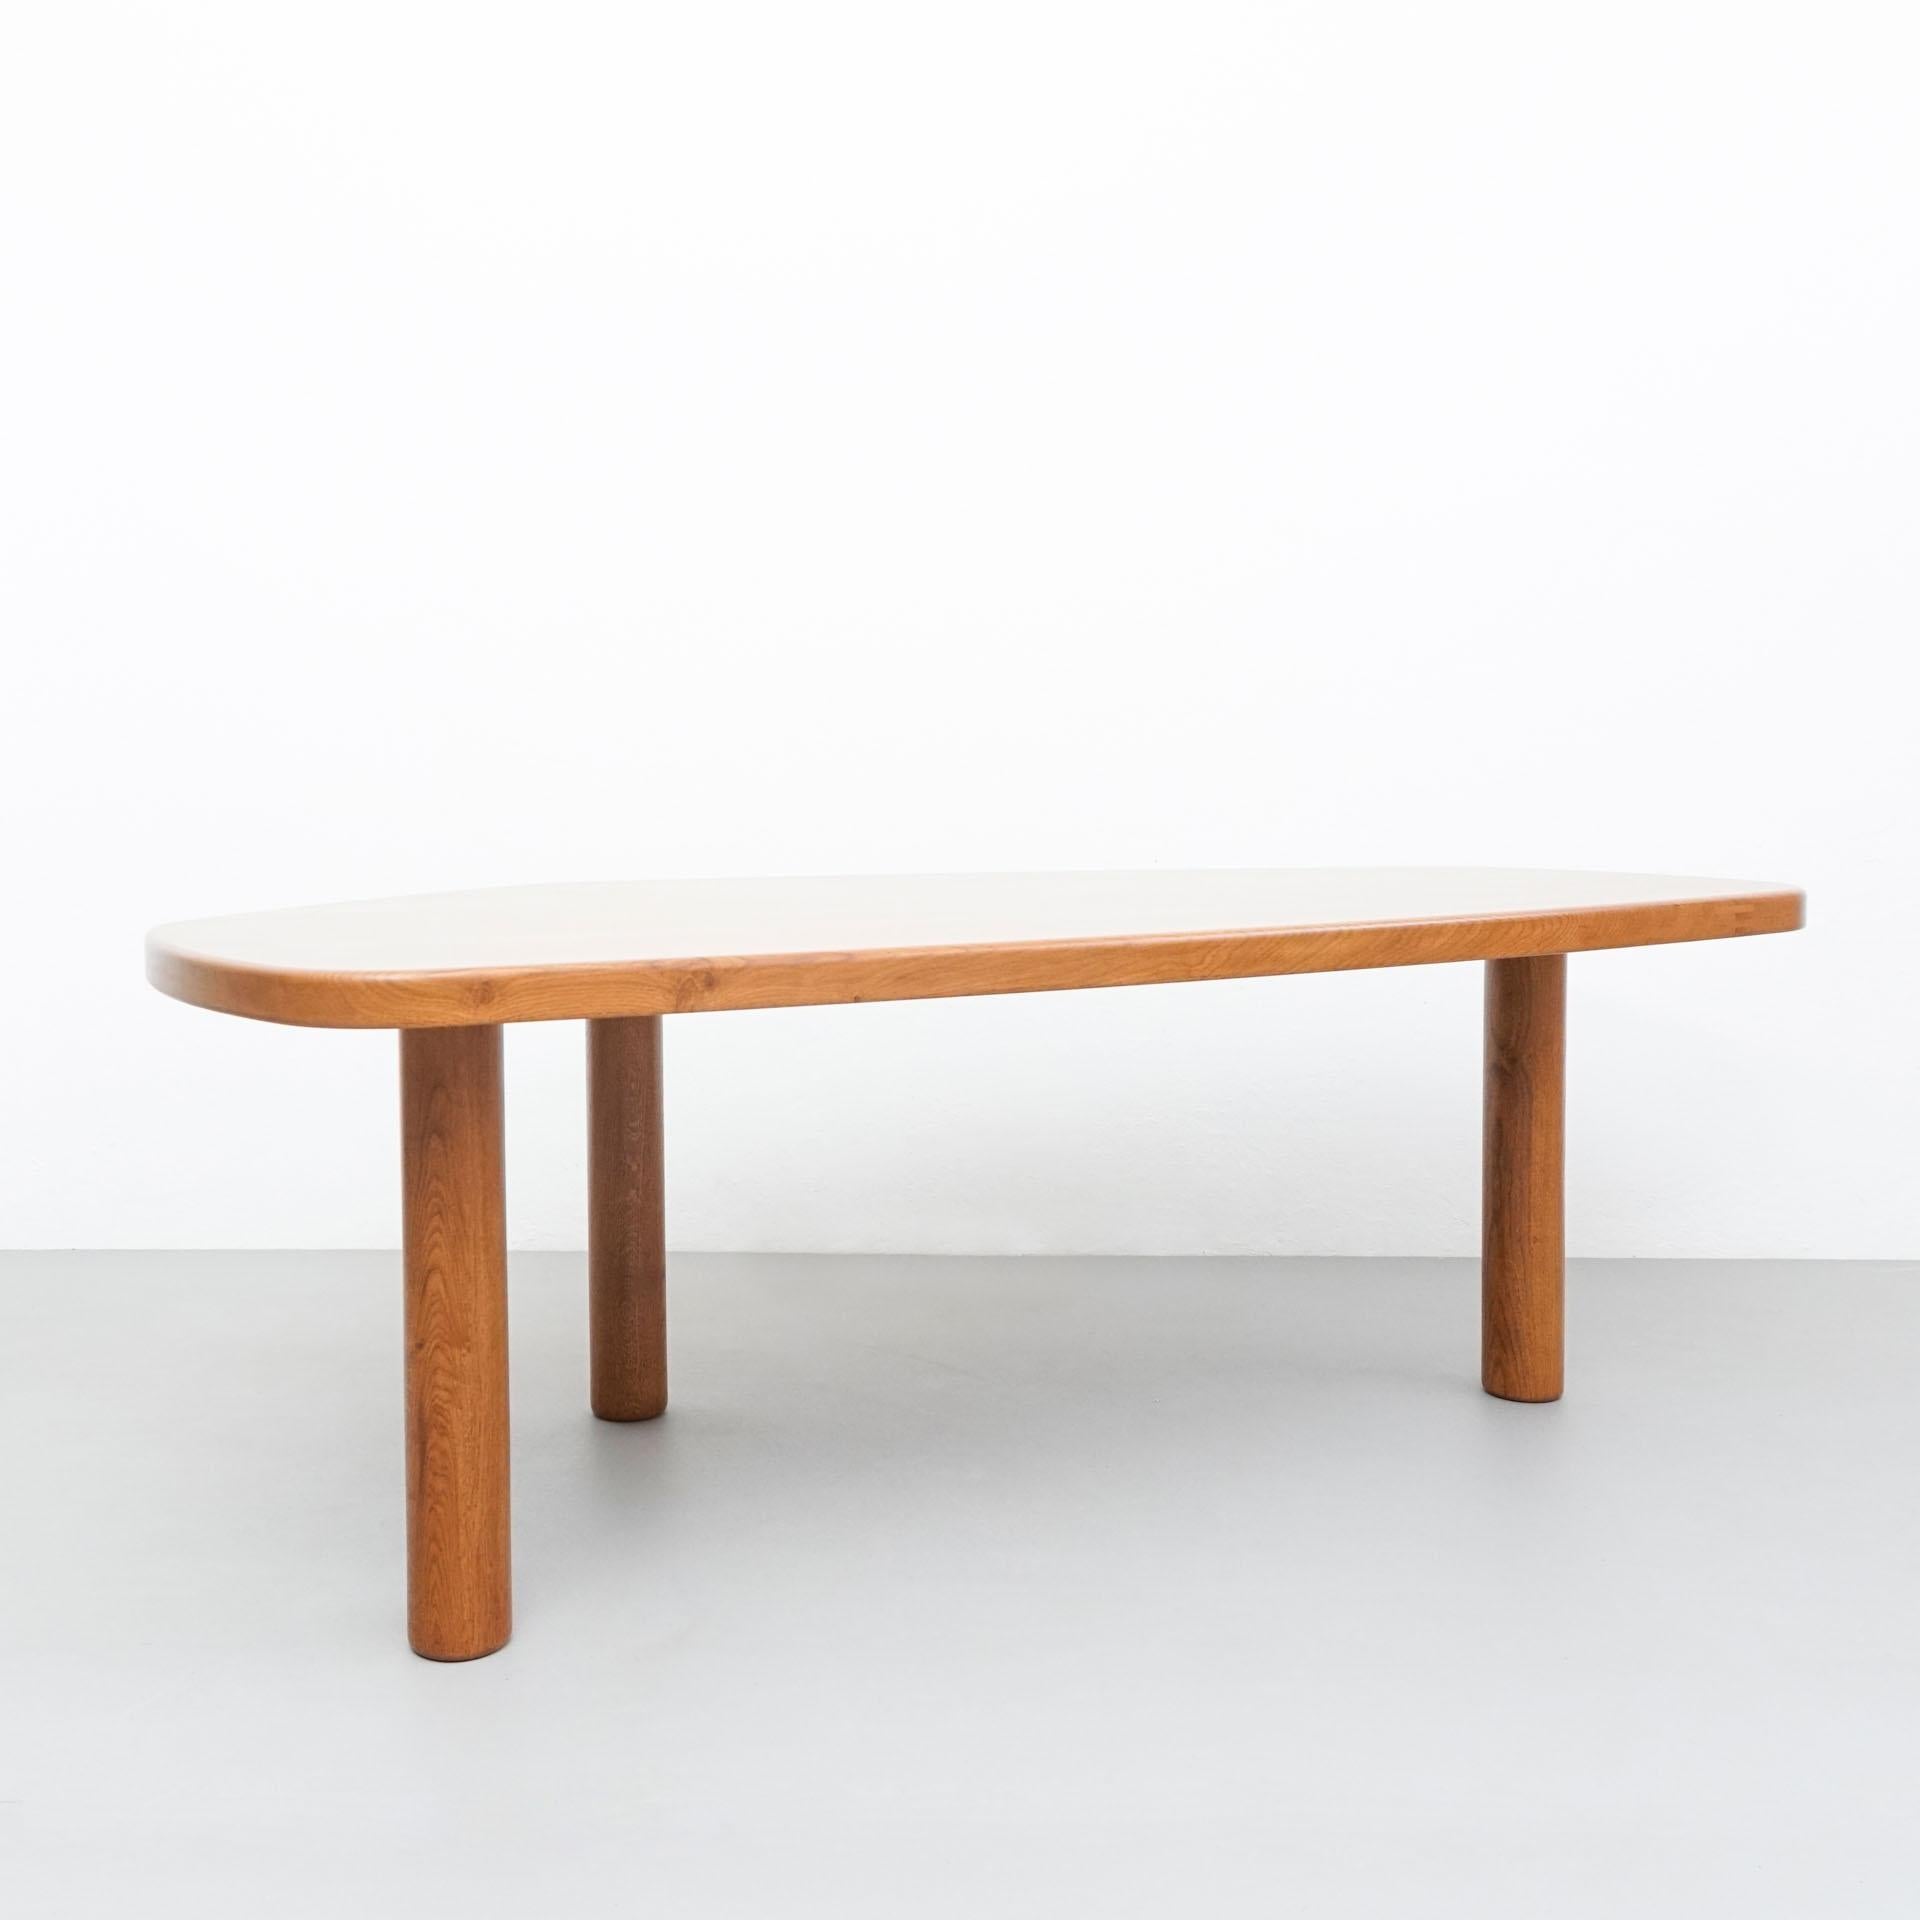 Spanish Dada Est. Contemporary, Oak Freeform Dining Large Table For Sale